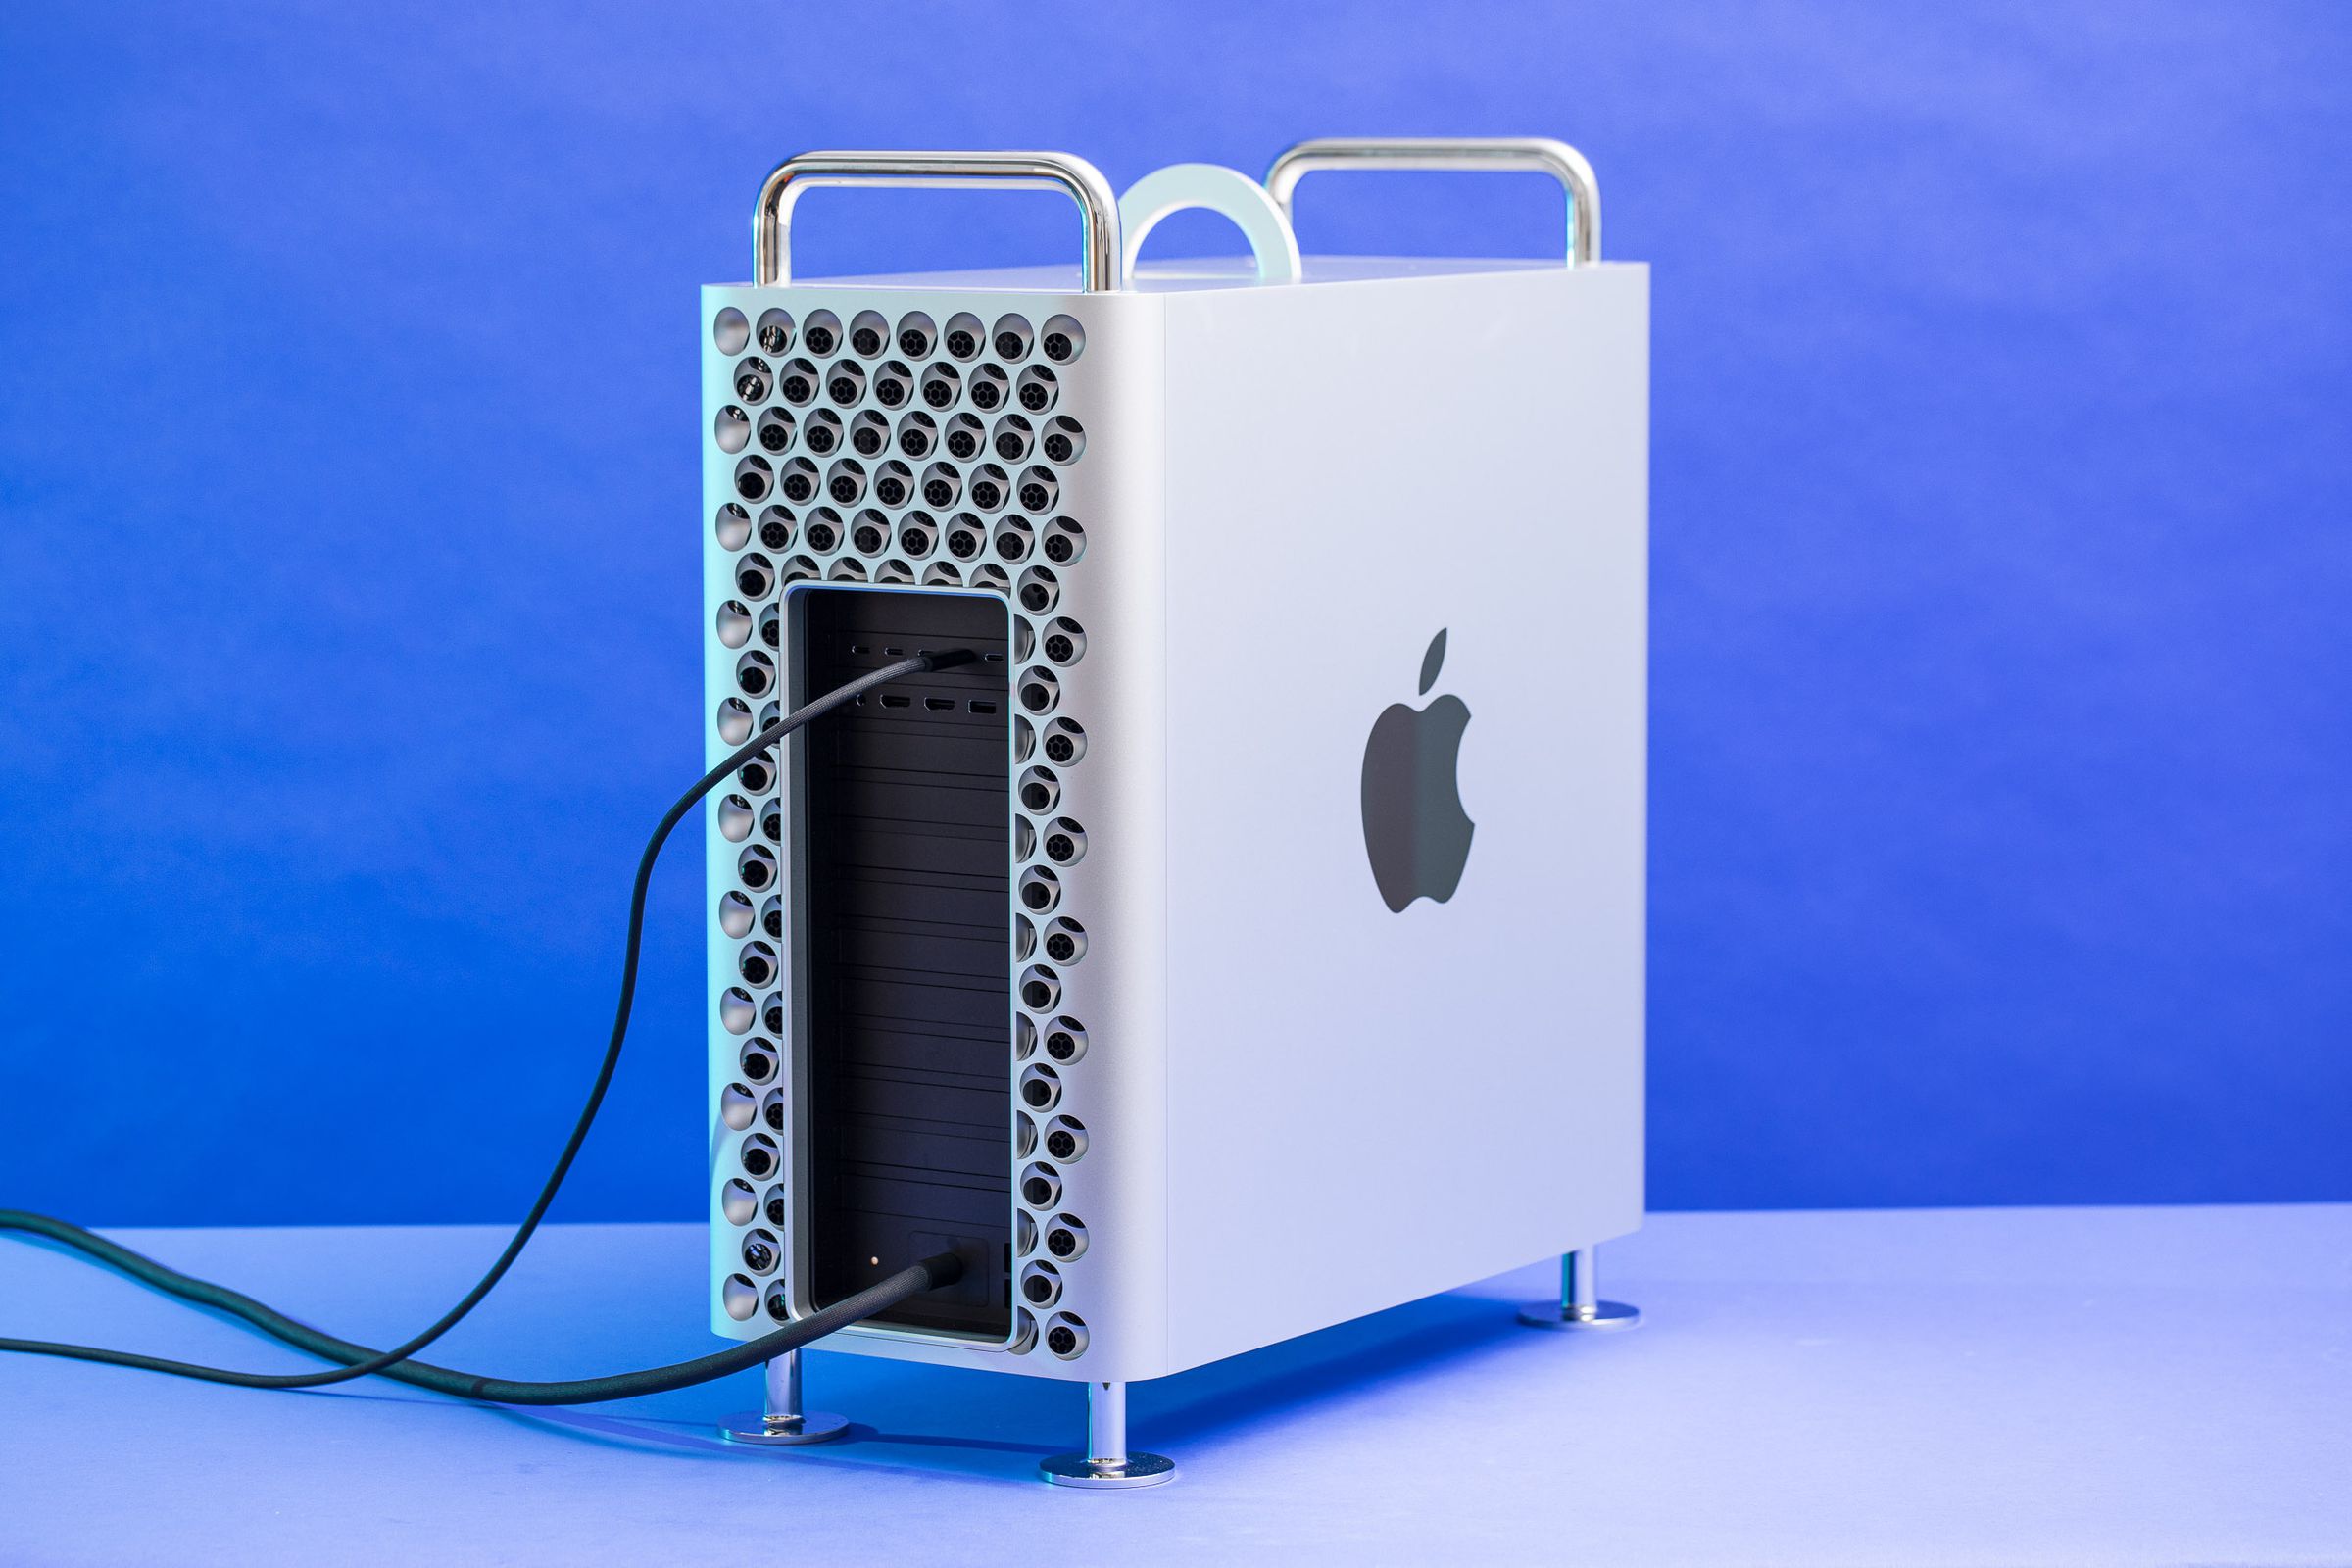 The Mac Pro seen from the back.